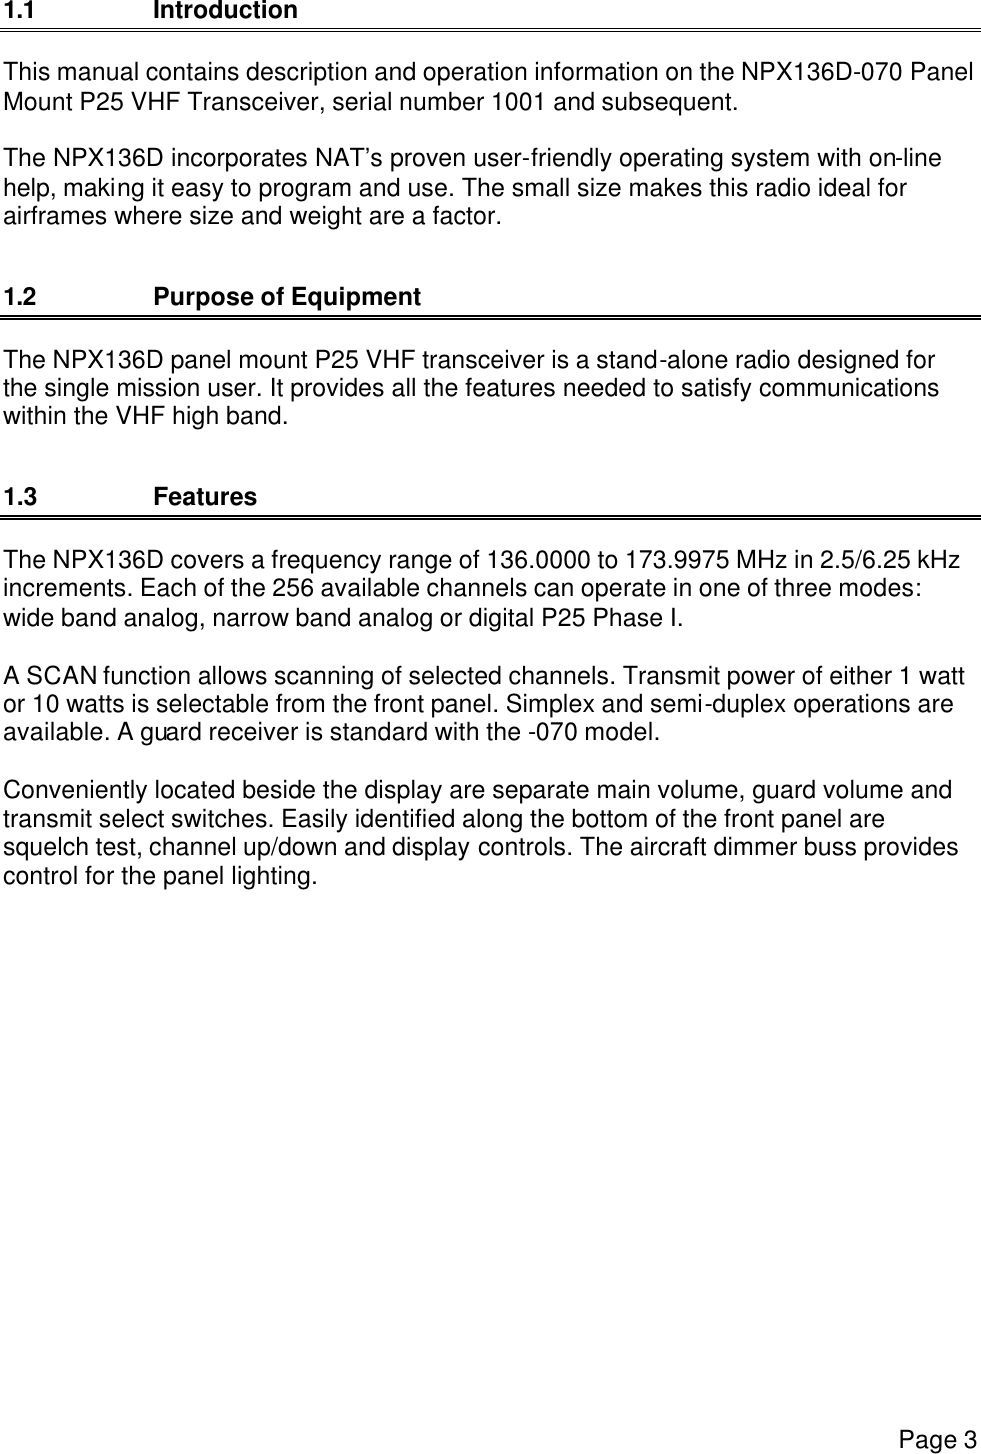     Page 3   1.1 Introduction This manual contains description and operation information on the NPX136D-070 Panel Mount P25 VHF Transceiver, serial number 1001 and subsequent.  The NPX136D incorporates NAT’s proven user-friendly operating system with on-line help, making it easy to program and use. The small size makes this radio ideal for airframes where size and weight are a factor.   1.2 Purpose of Equipment The NPX136D panel mount P25 VHF transceiver is a stand-alone radio designed for the single mission user. It provides all the features needed to satisfy communications within the VHF high band.  1.3  Features The NPX136D covers a frequency range of 136.0000 to 173.9975 MHz in 2.5/6.25 kHz increments. Each of the 256 available channels can operate in one of three modes: wide band analog, narrow band analog or digital P25 Phase I.   A SCAN function allows scanning of selected channels. Transmit power of either 1 watt or 10 watts is selectable from the front panel. Simplex and semi-duplex operations are available. A guard receiver is standard with the -070 model.  Conveniently located beside the display are separate main volume, guard volume and transmit select switches. Easily identified along the bottom of the front panel are squelch test, channel up/down and display controls. The aircraft dimmer buss provides control for the panel lighting.     